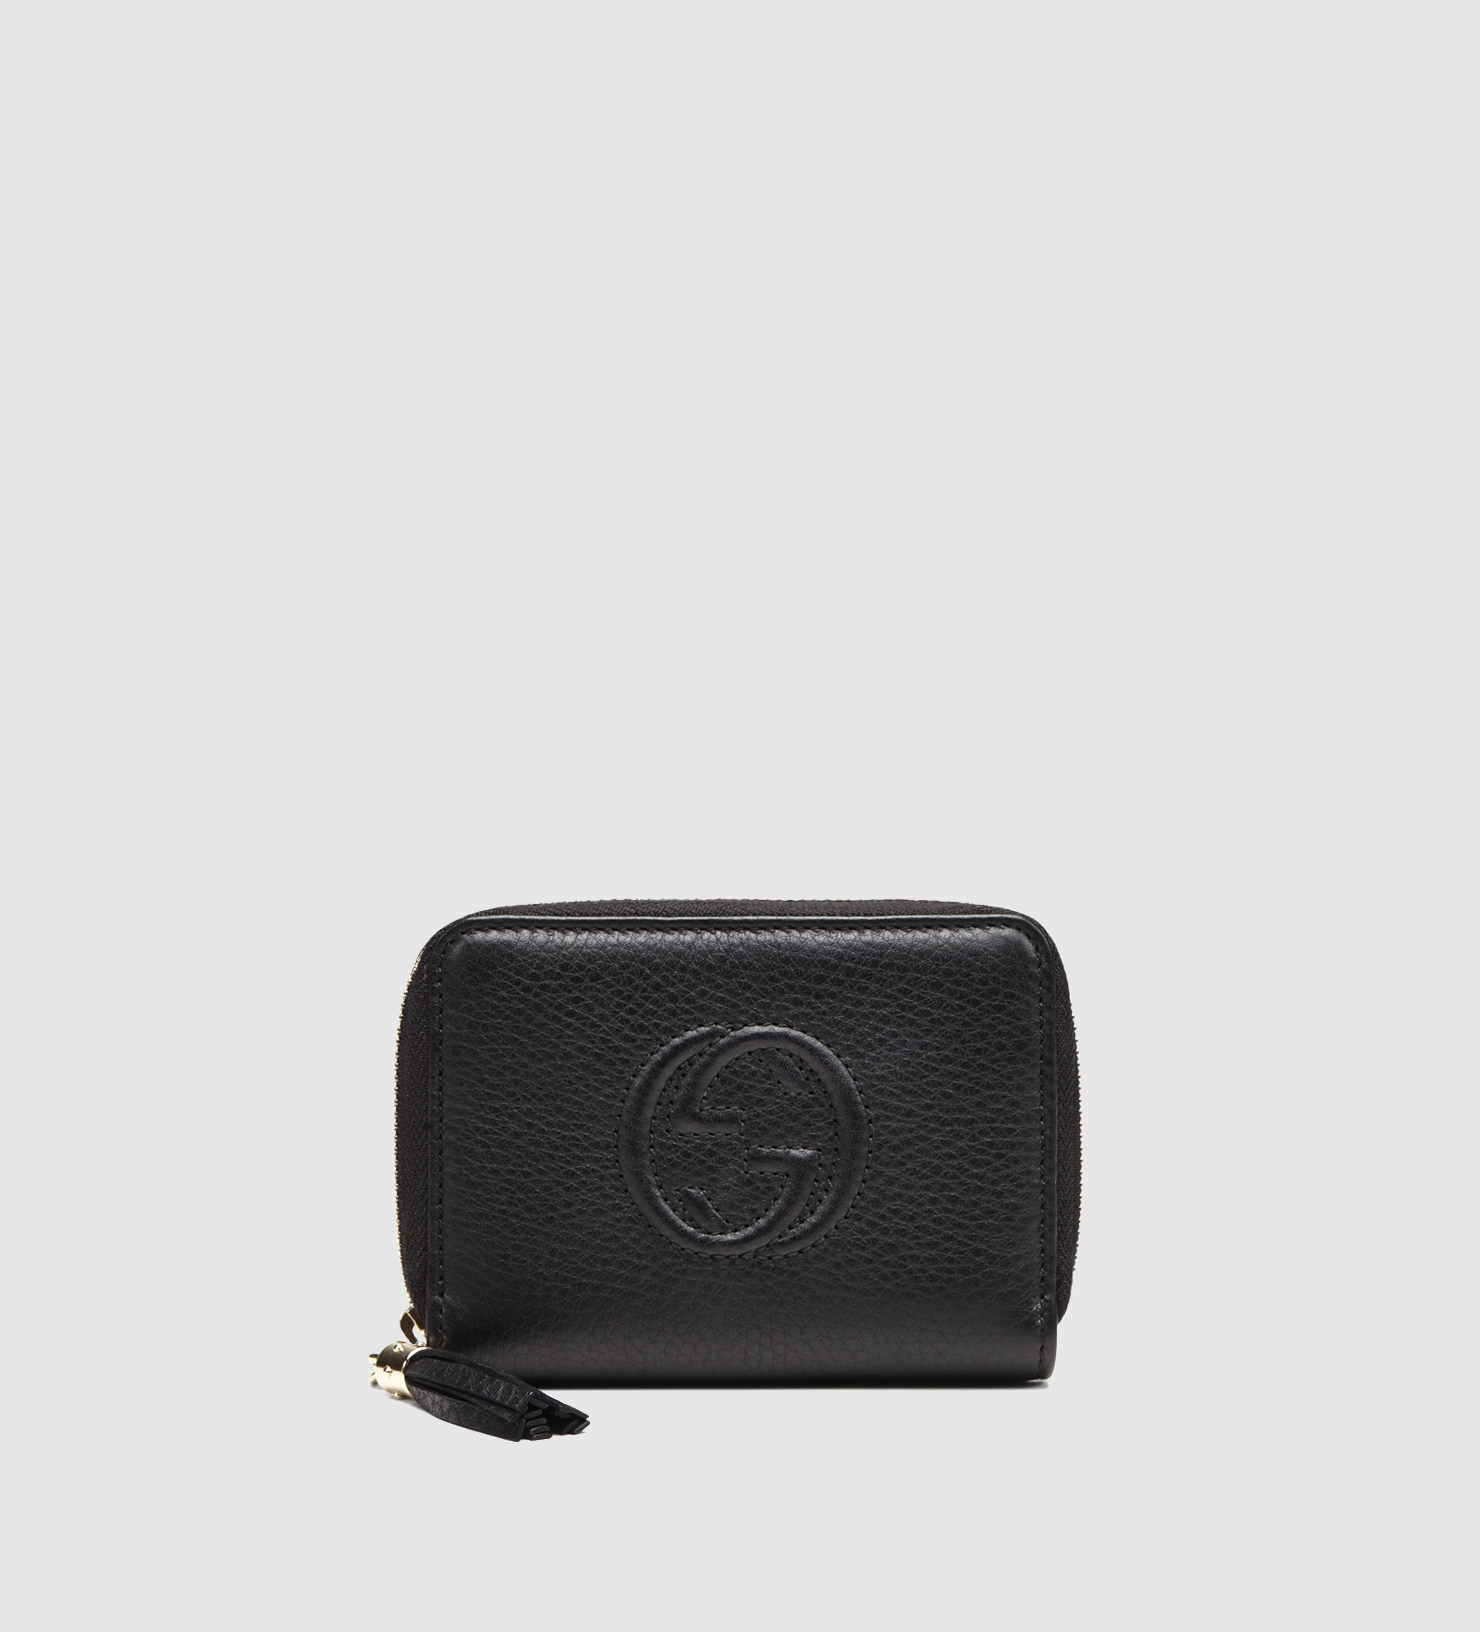 Gucci Black Leather Zip Around Wallet, Leather